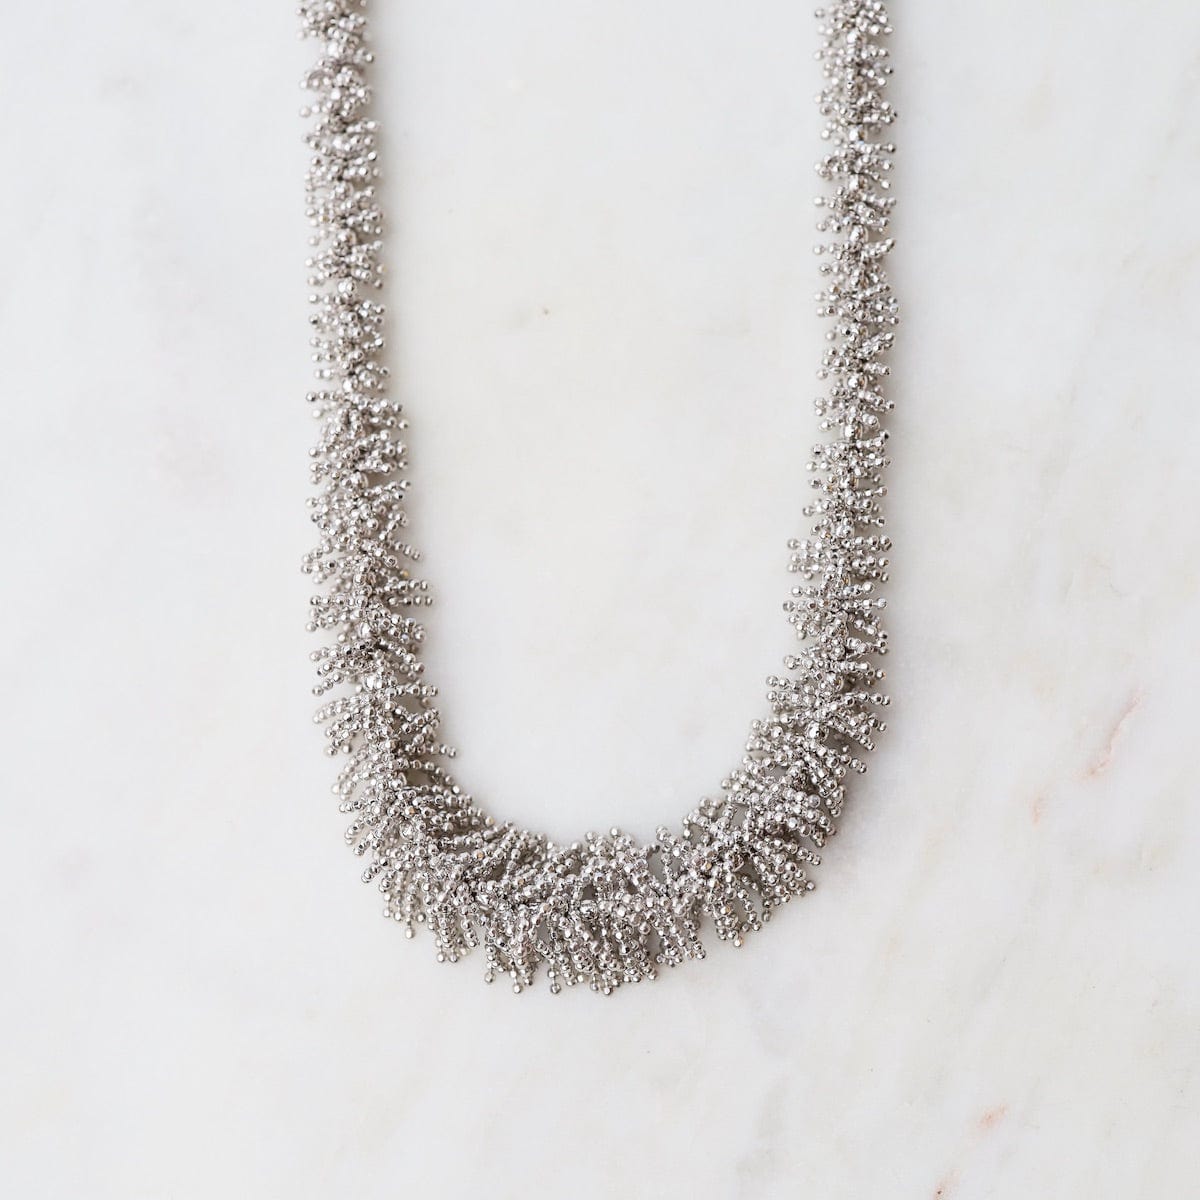 NKL Graduated Fuzzy Necklace